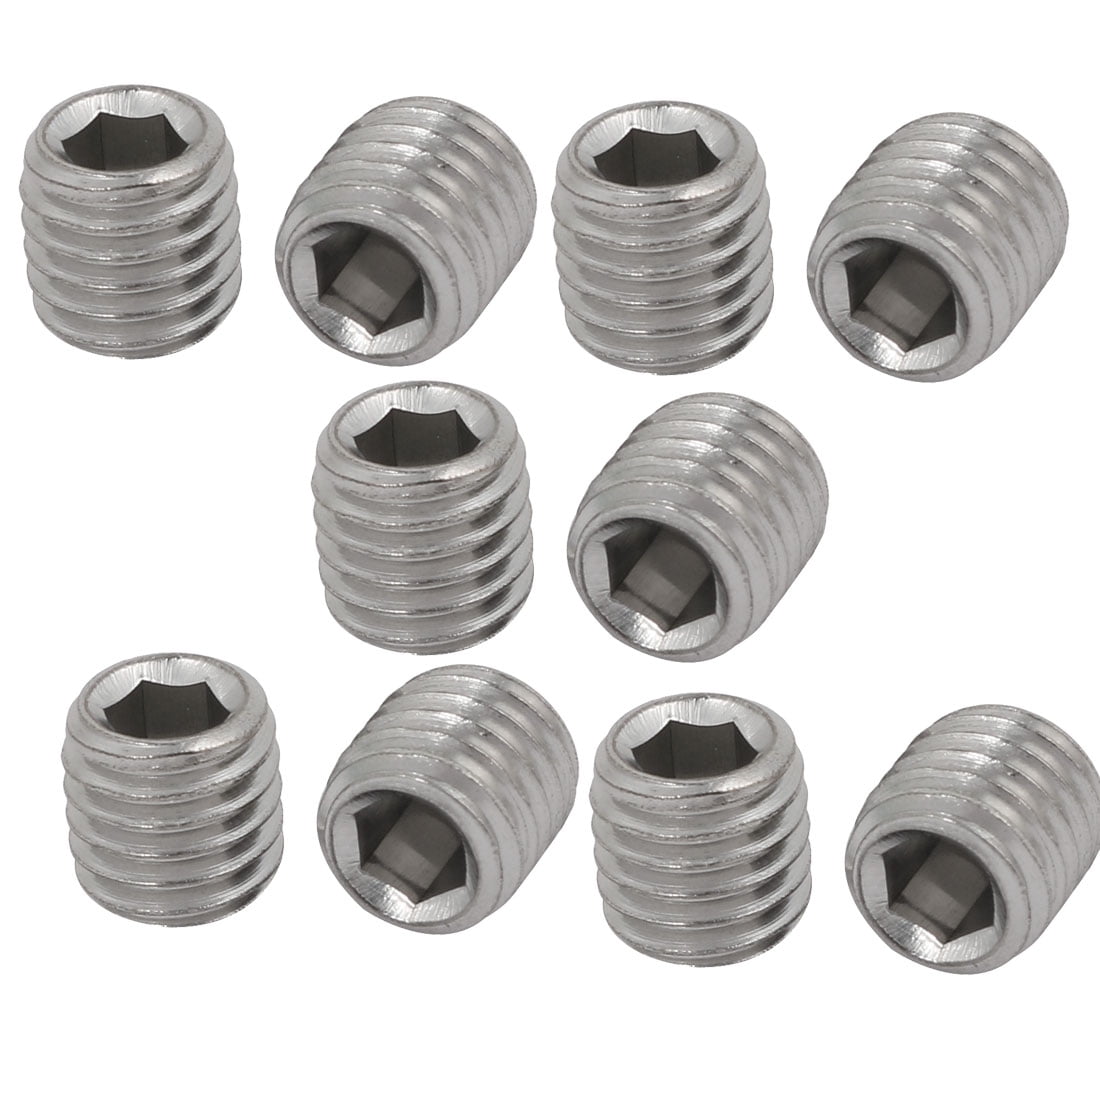 10mm M10x1.0 Anti-Theft Security Nuts Stainless Steel Set of 8 